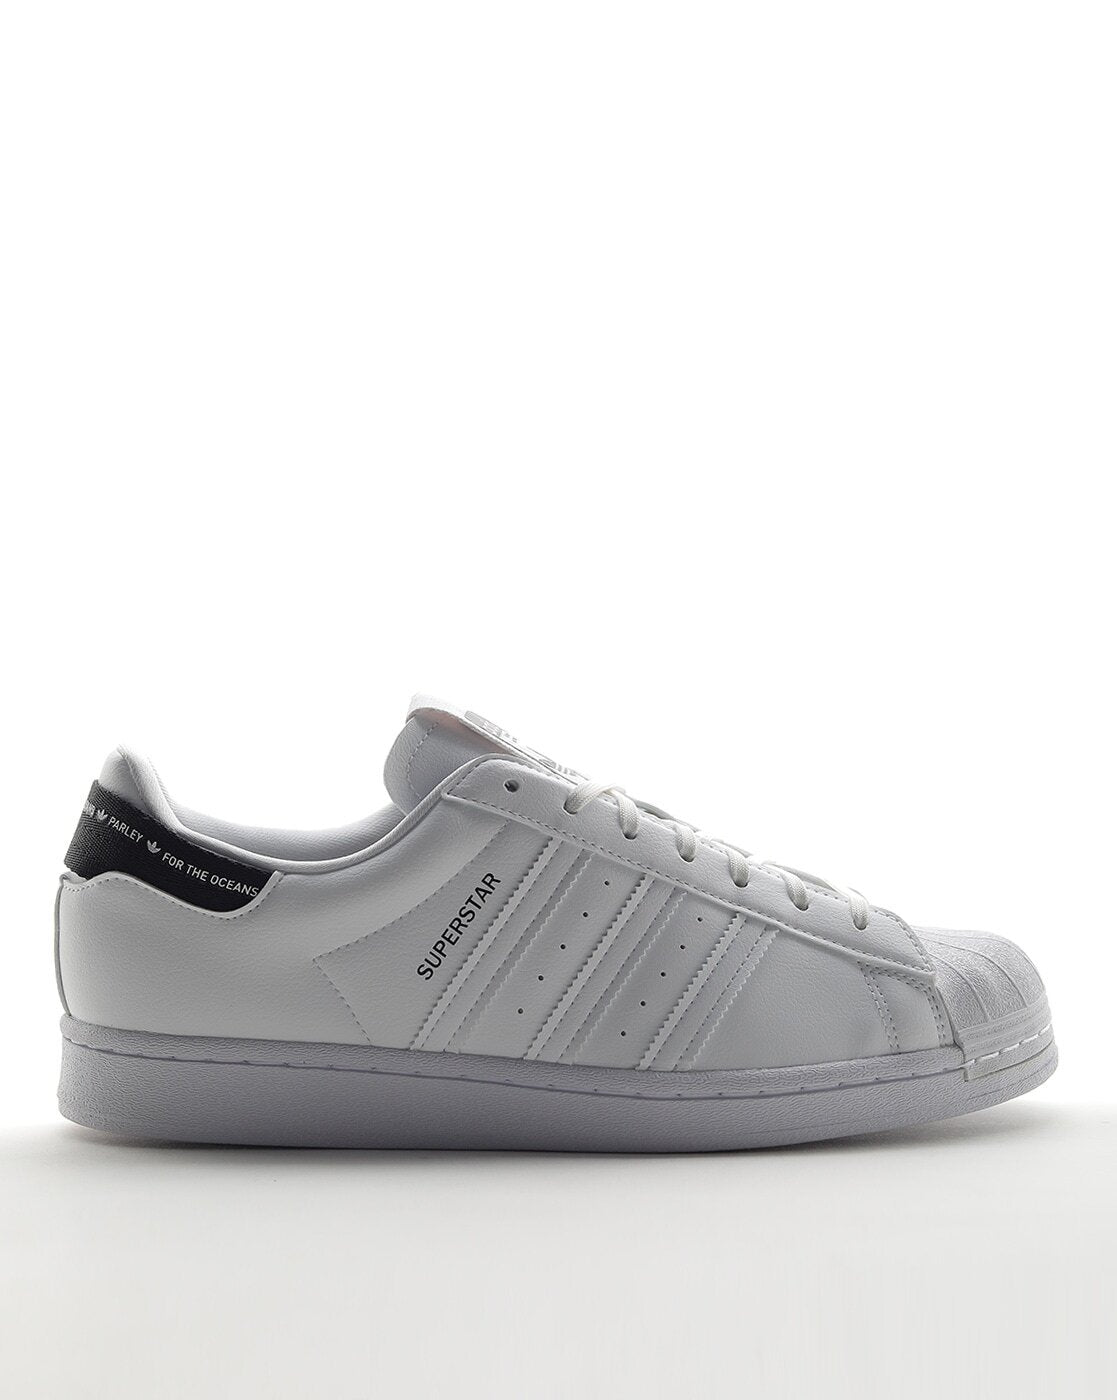 SUPERSTAR Lace-Up Casual Shoes-Gv7610